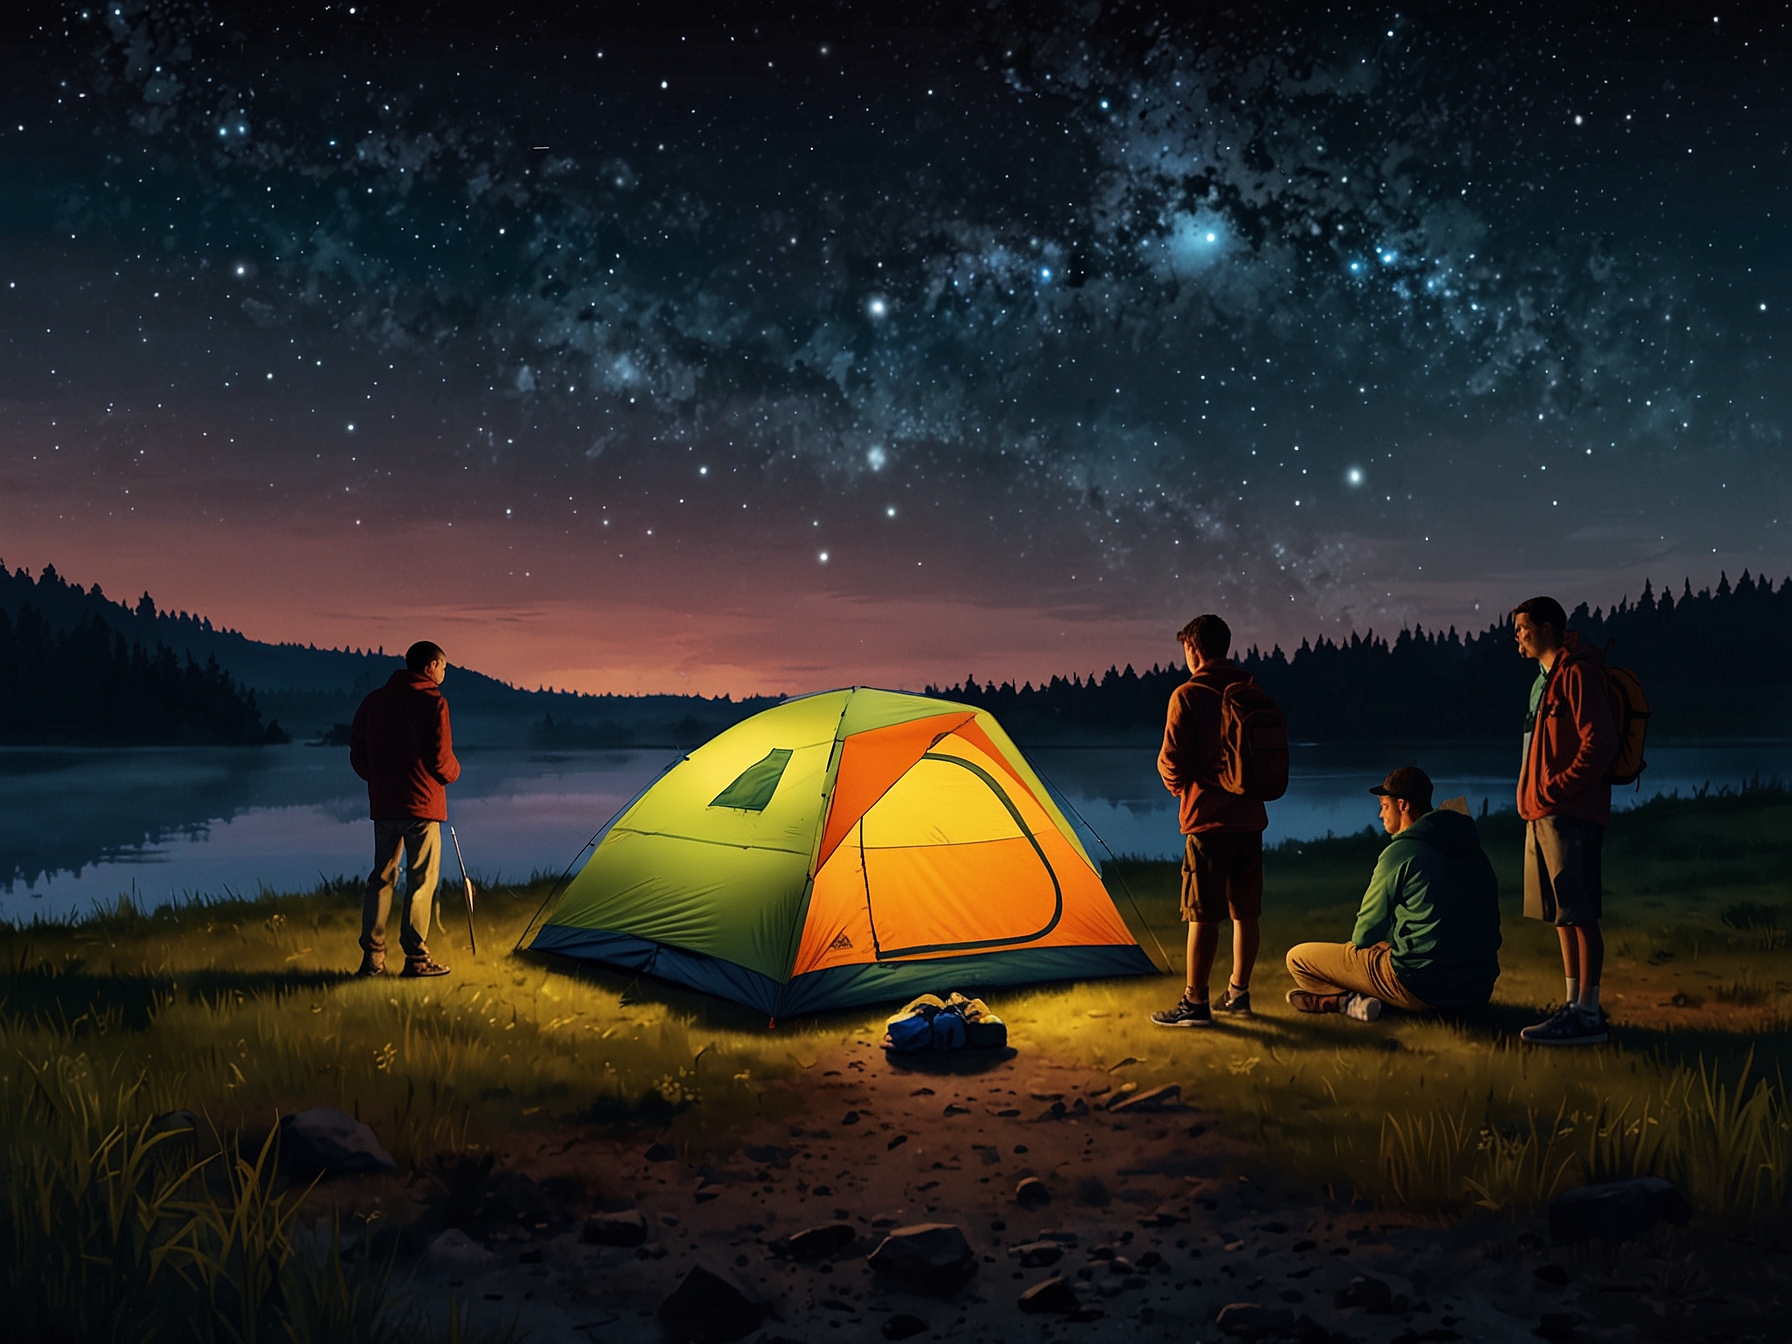 Sneaker enthusiasts camping out for the original 2012 release of the 'Galaxy,' highlighting the shoe's immense popularity and the fervent anticipation for its 2025 return.